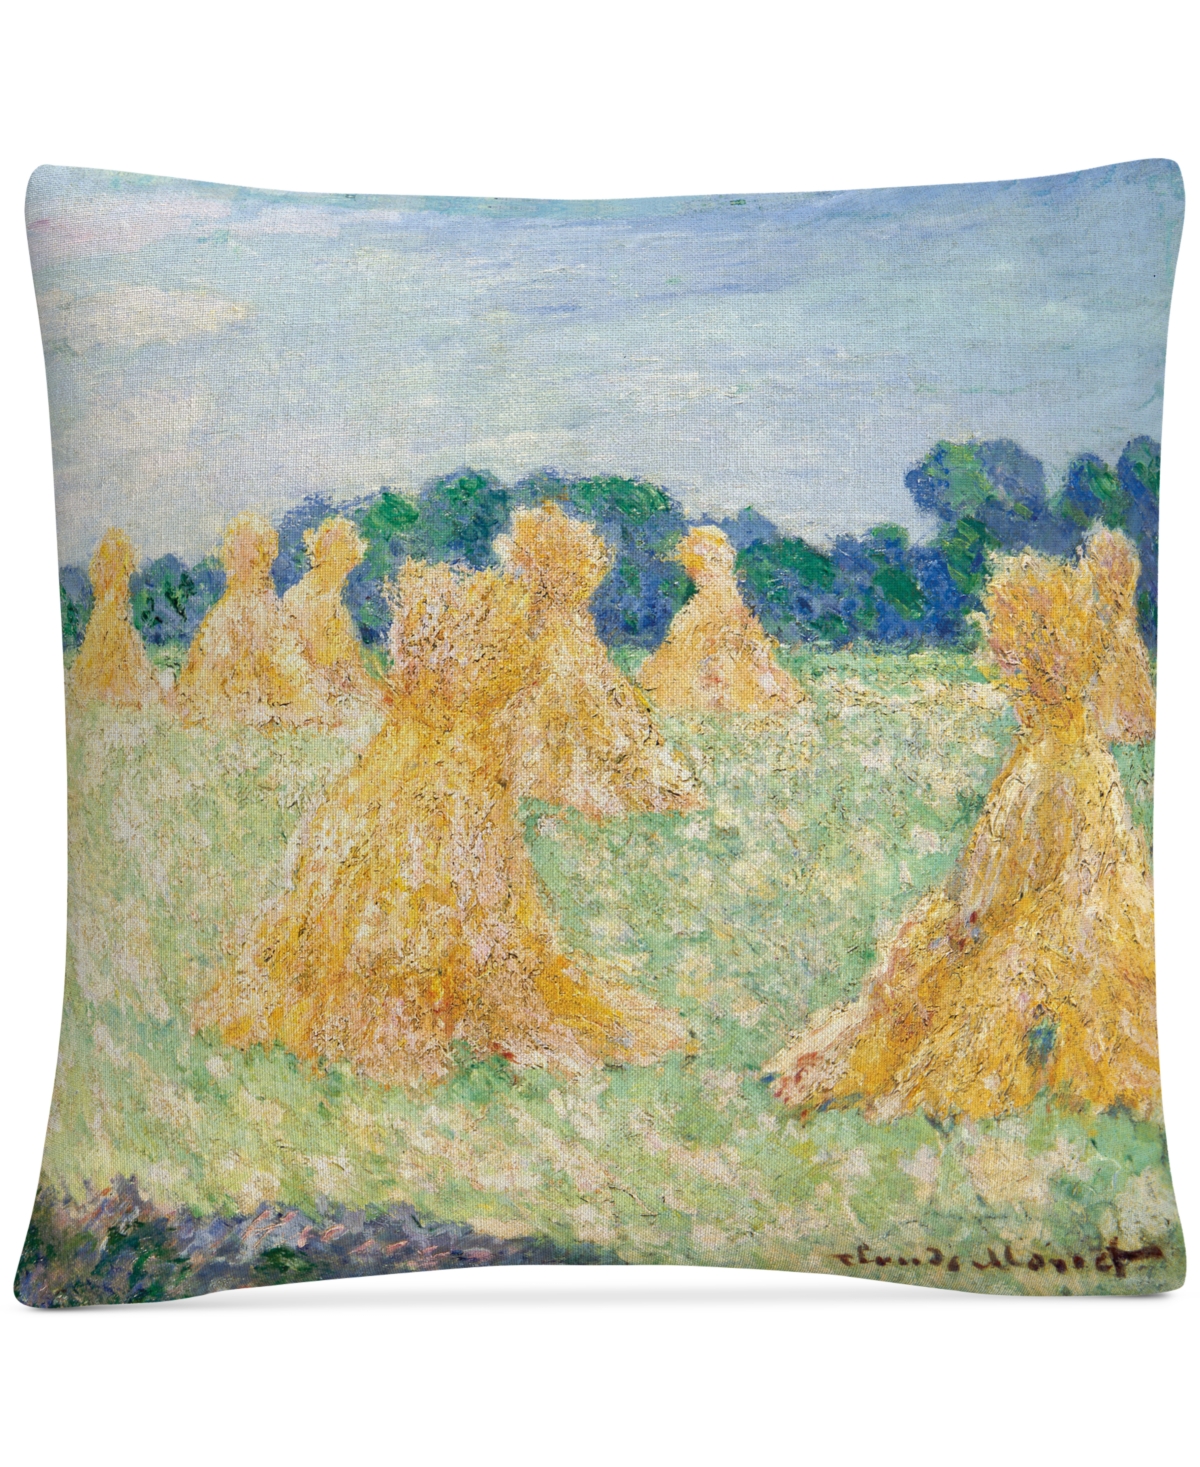 Claude Monet The Young Ladies Of Givemy Decorative Pillow, 16 x 16